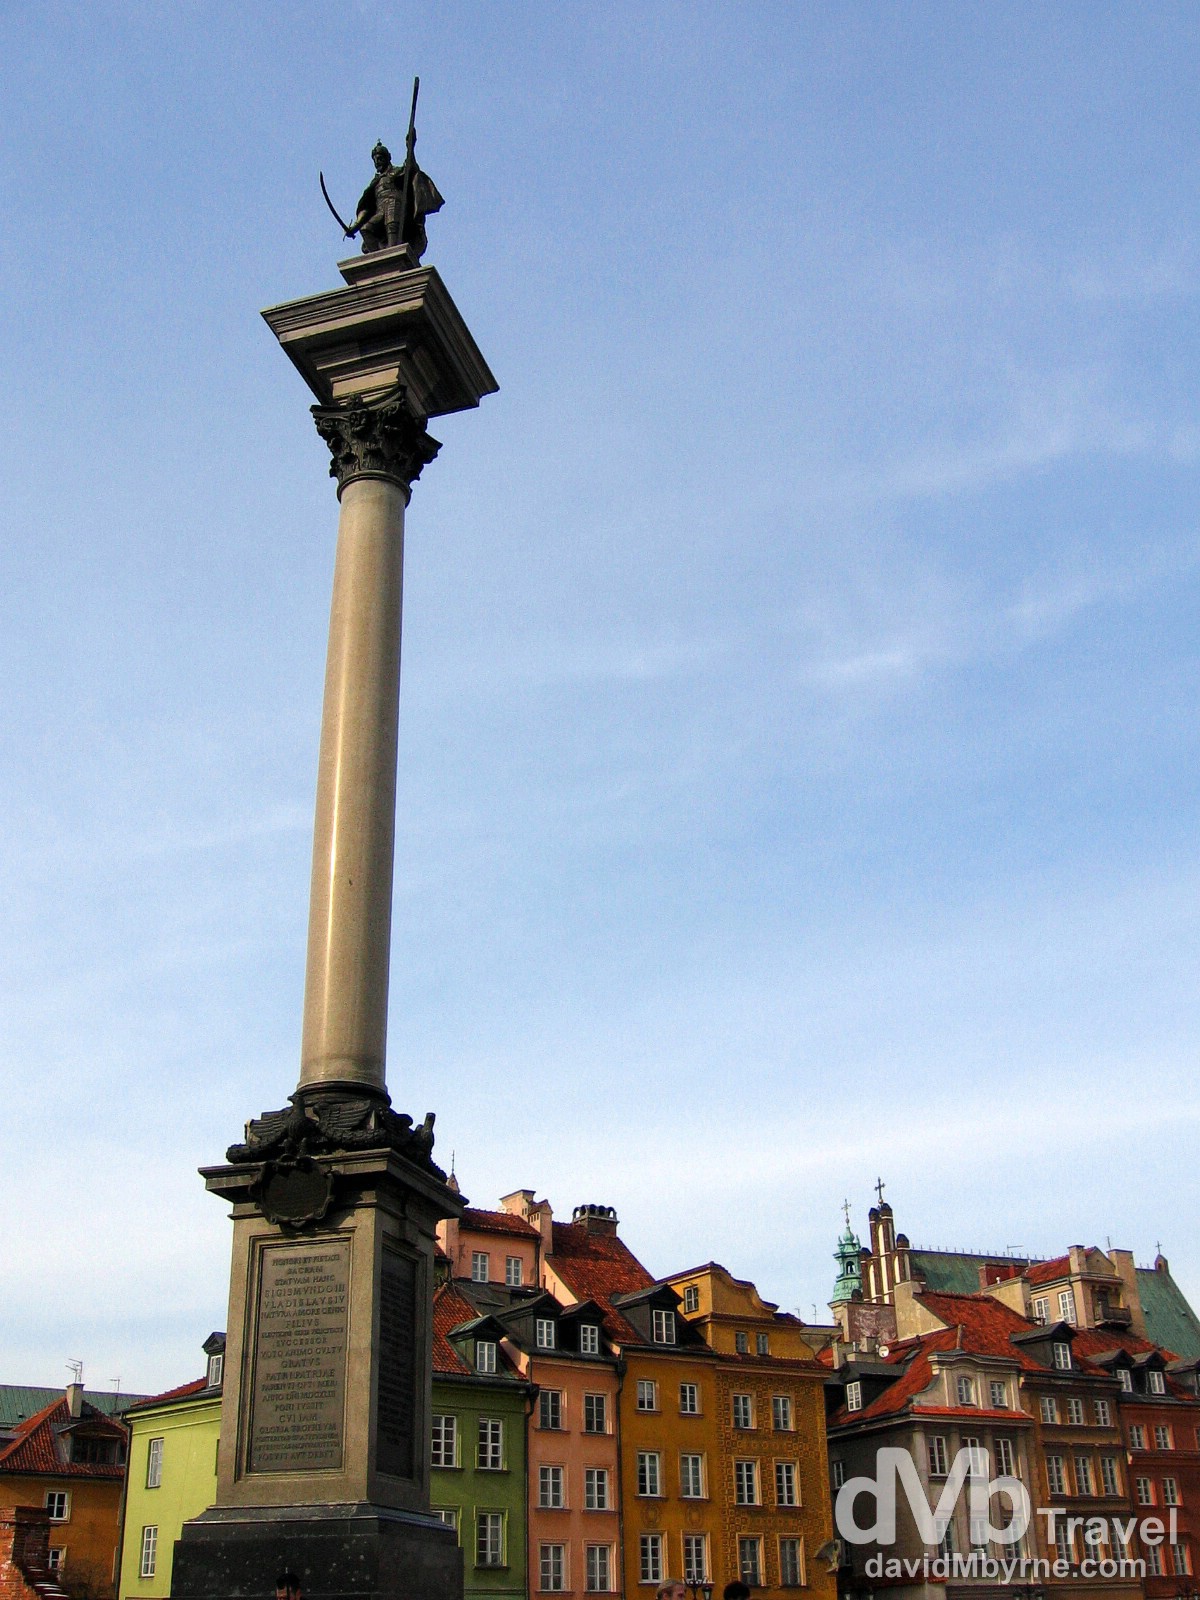 The Sigismund III Vasa pillar/statue in Castle Square, Old Town, Warsaw, Poland. March 5, 2006.